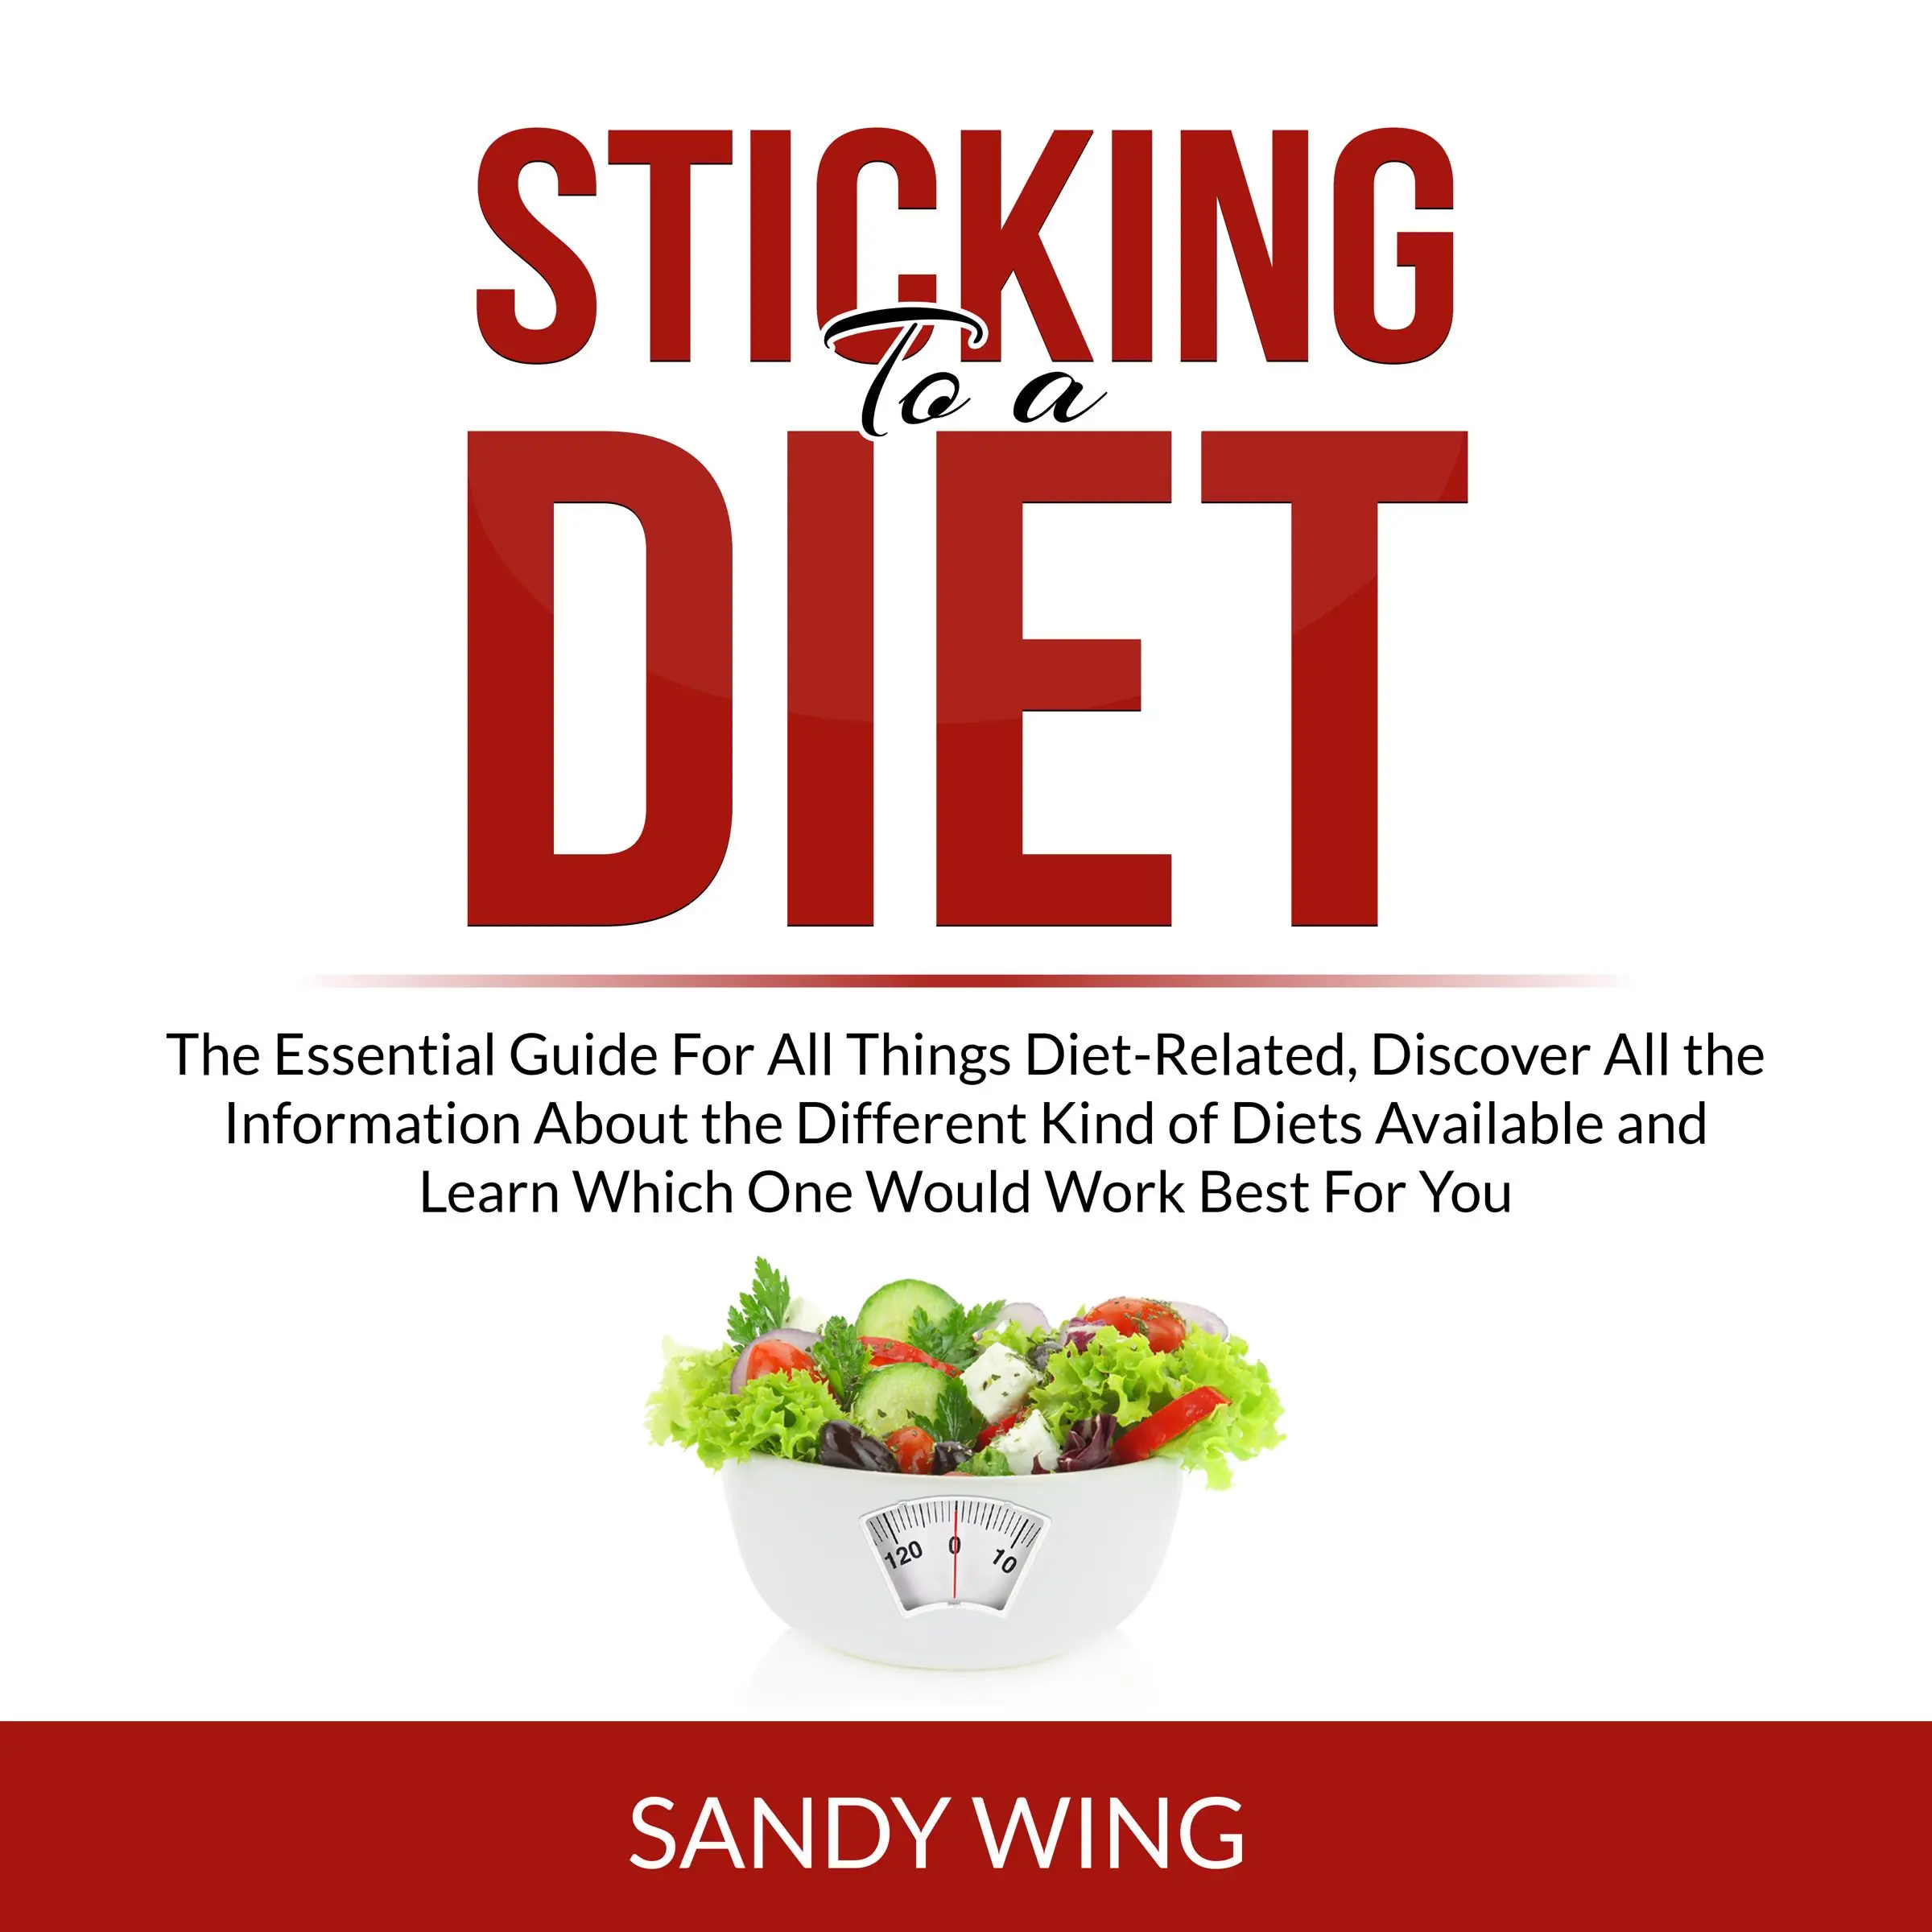 Sticking to a Diet: The Essential Guide For All Things Diet-Related, Discover All the Information About the Different Kind of Diets Available and Learn Which One Would Work Best For You Audiobook by Sandy Wing